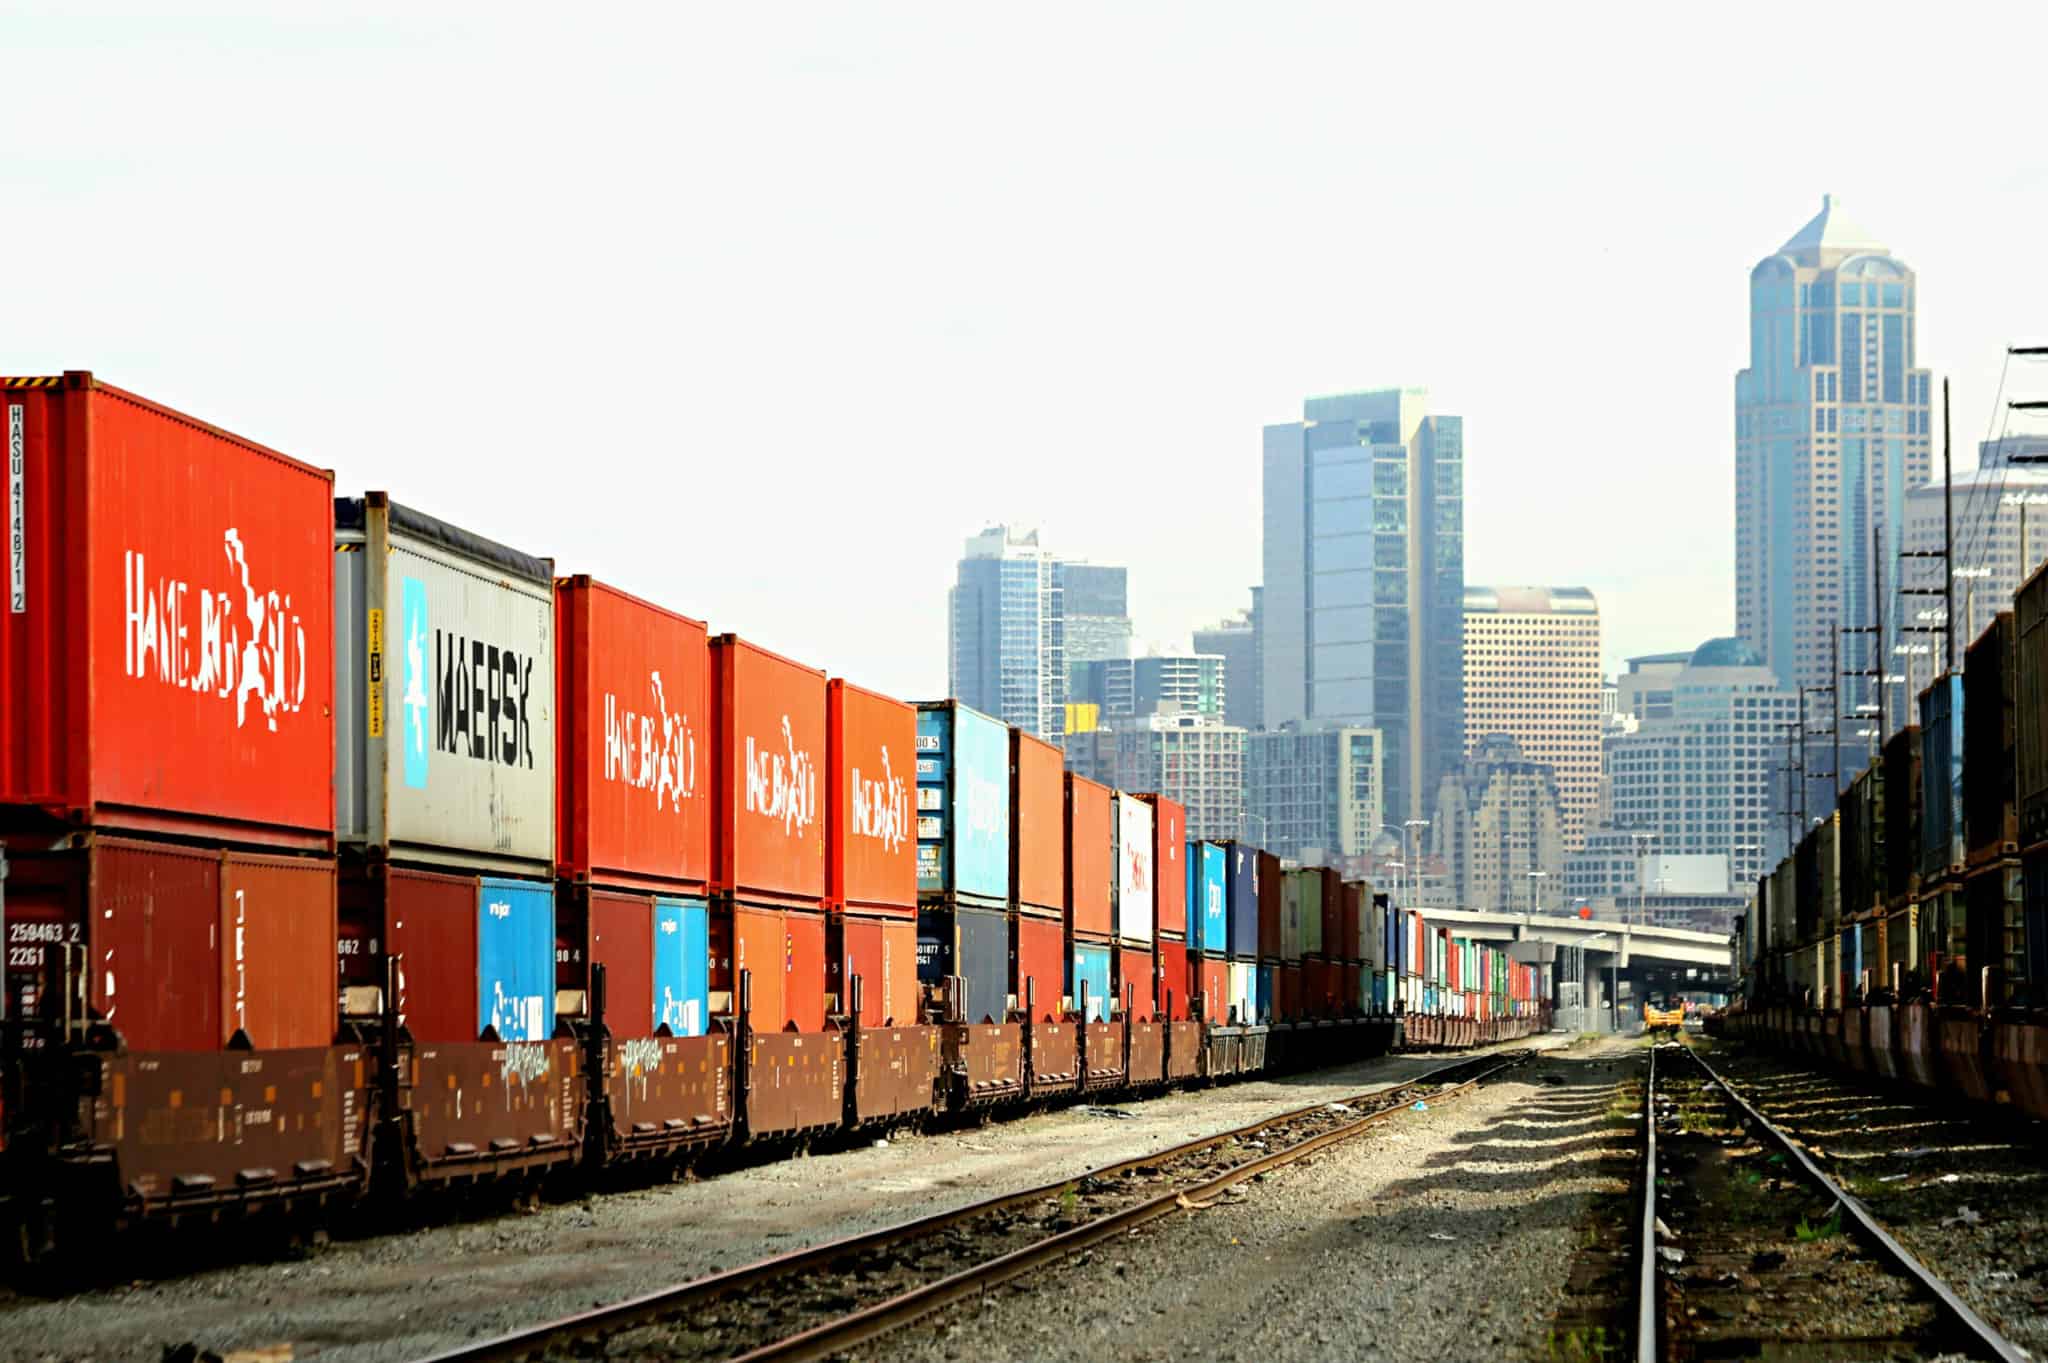 rows of containers in the open space of a port, an important logistics and transport platform